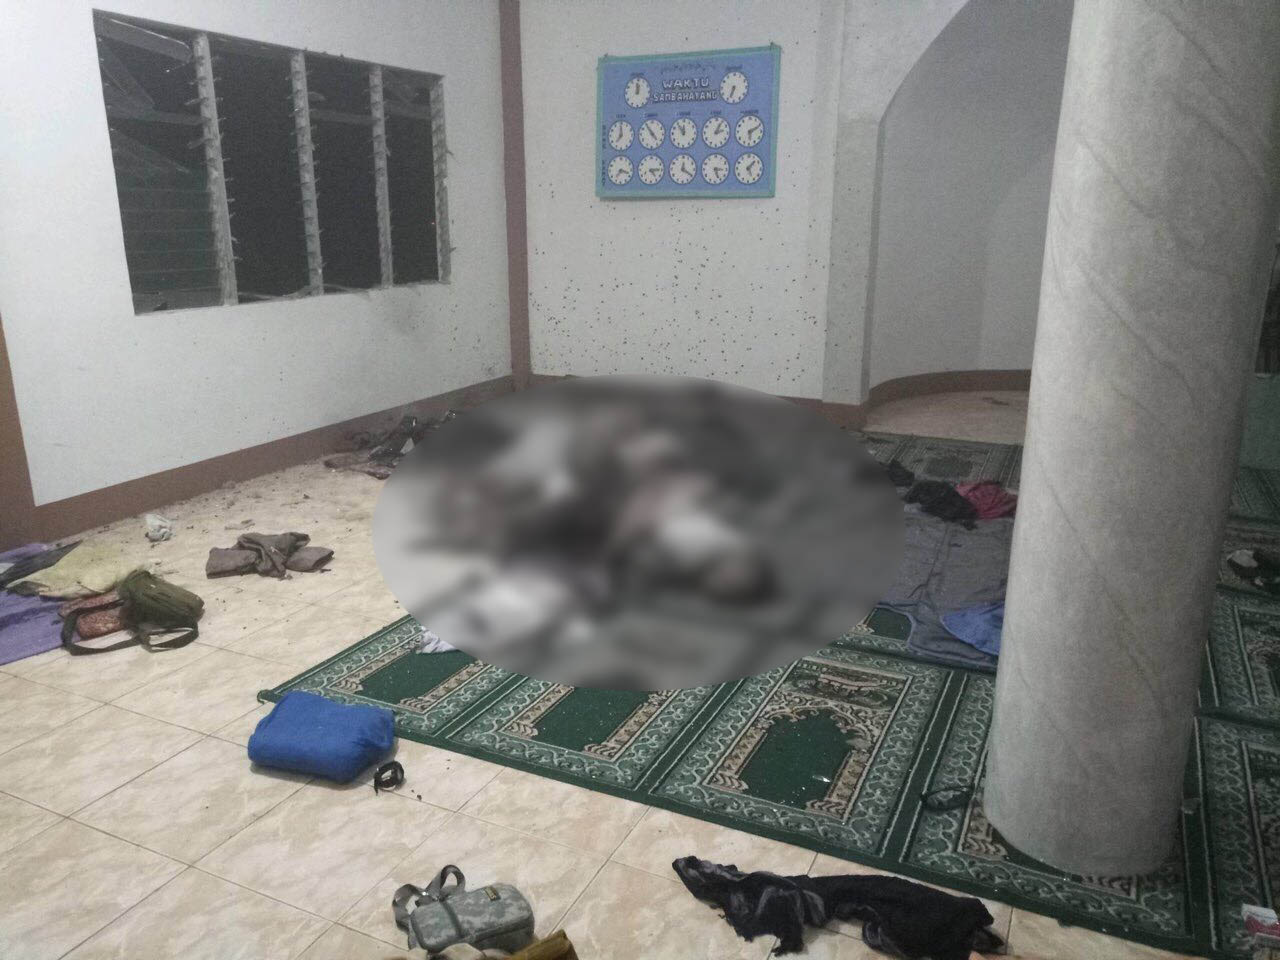 GRENADE ATTACK. A grenade is thrown inside a Zamboanga City mosque where religious leaders were resting on Wednesday, January 30. PNP Zamboanga photo 